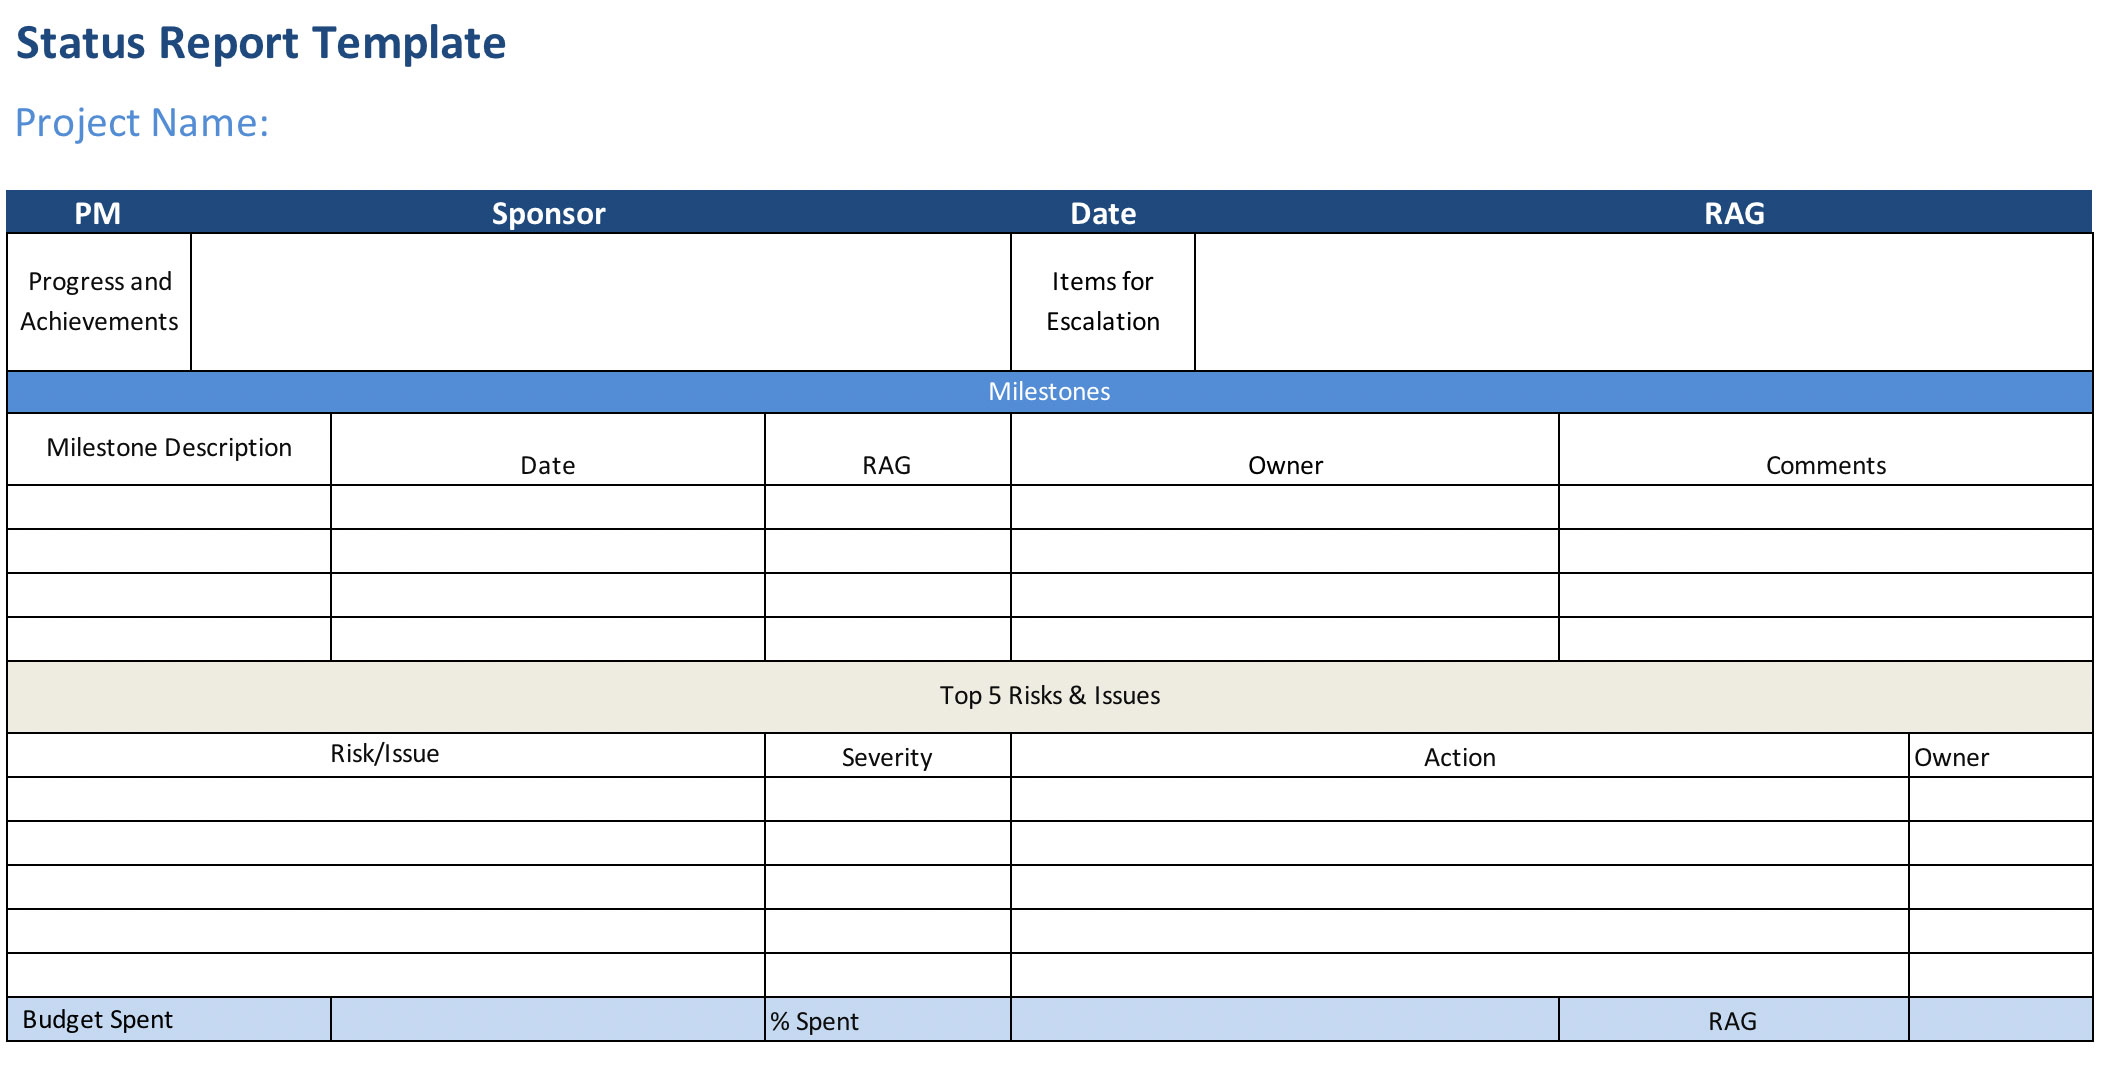 Project Status Report (Free Excel Template) - ProjectManager.com Throughout One Page Status Report Template